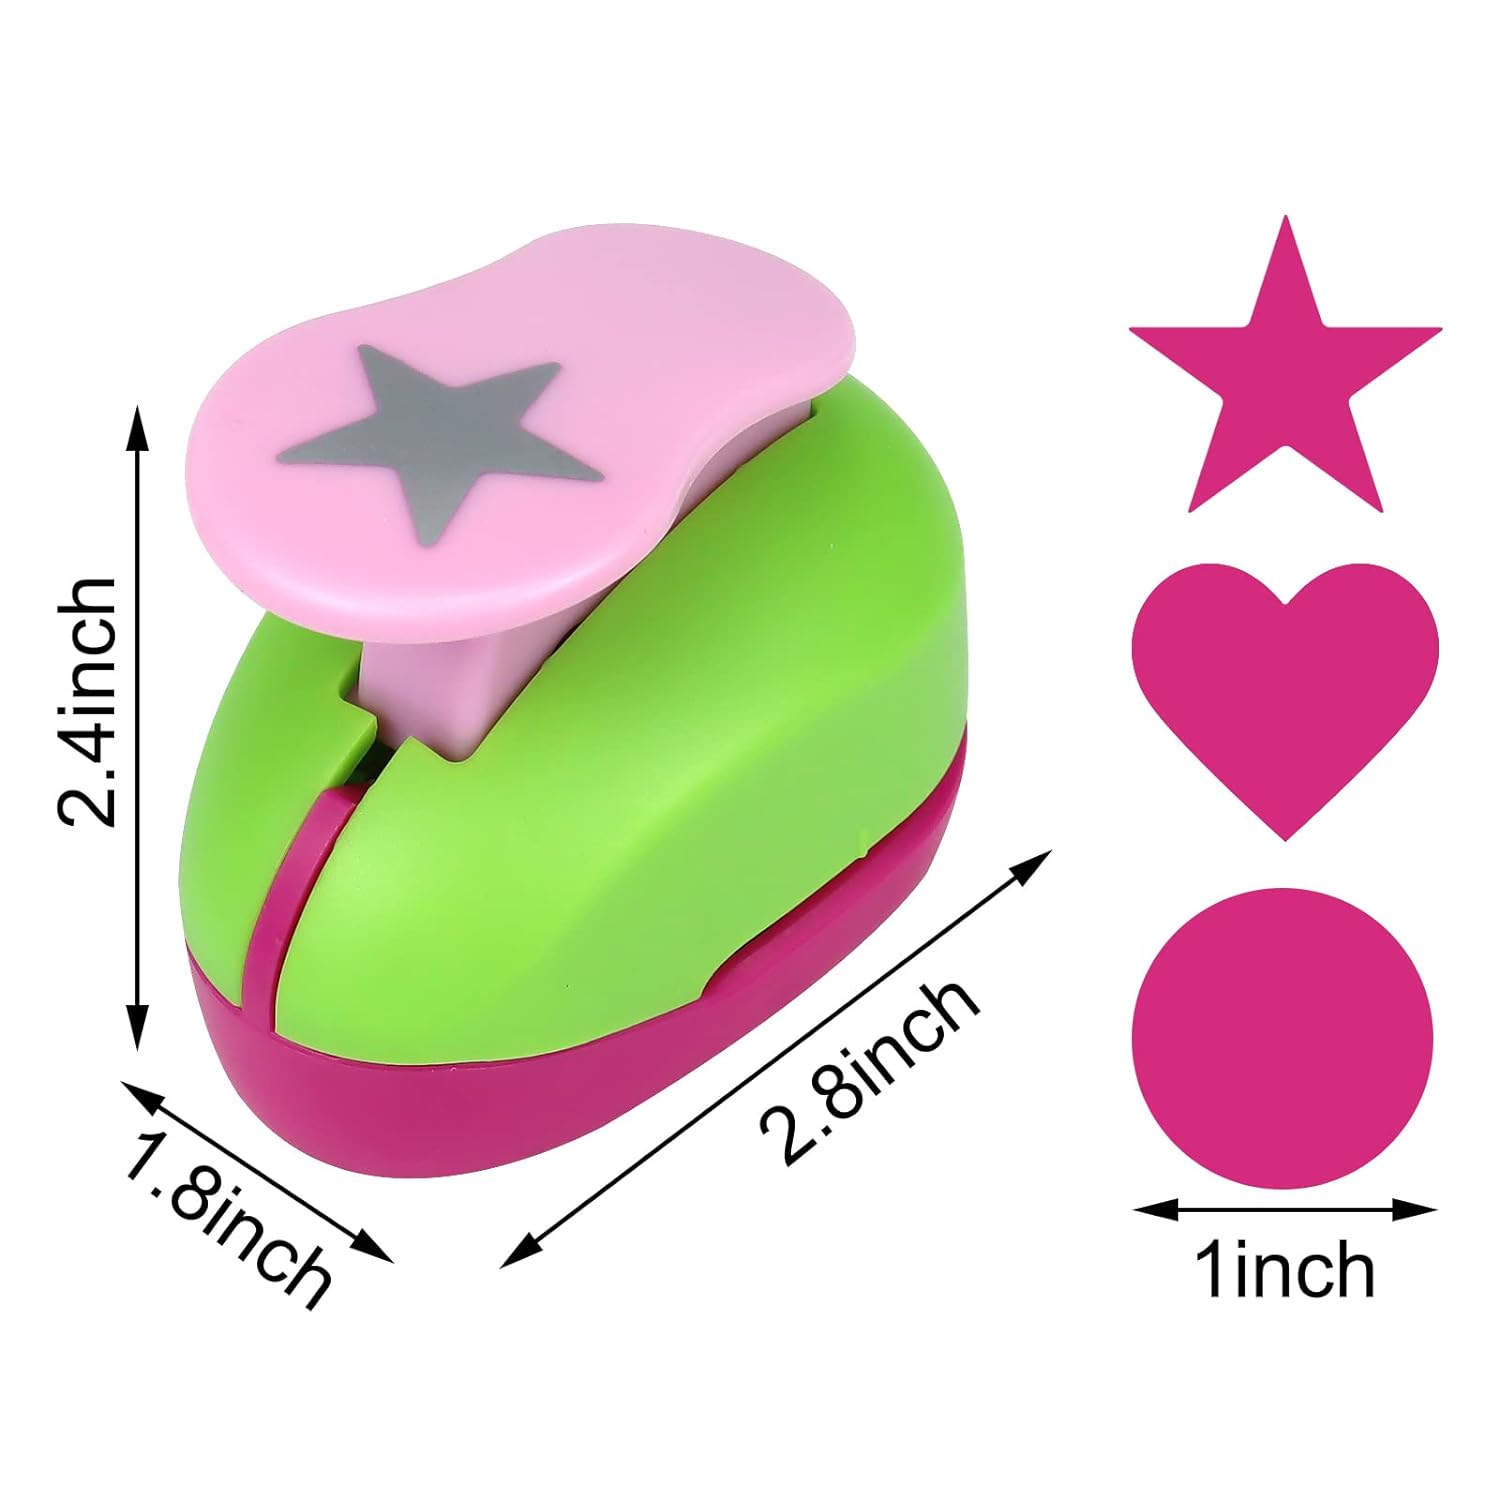 3Pcs 1 Inch Paper Punches with Heart,Star,Circle Craft Hole Shapes